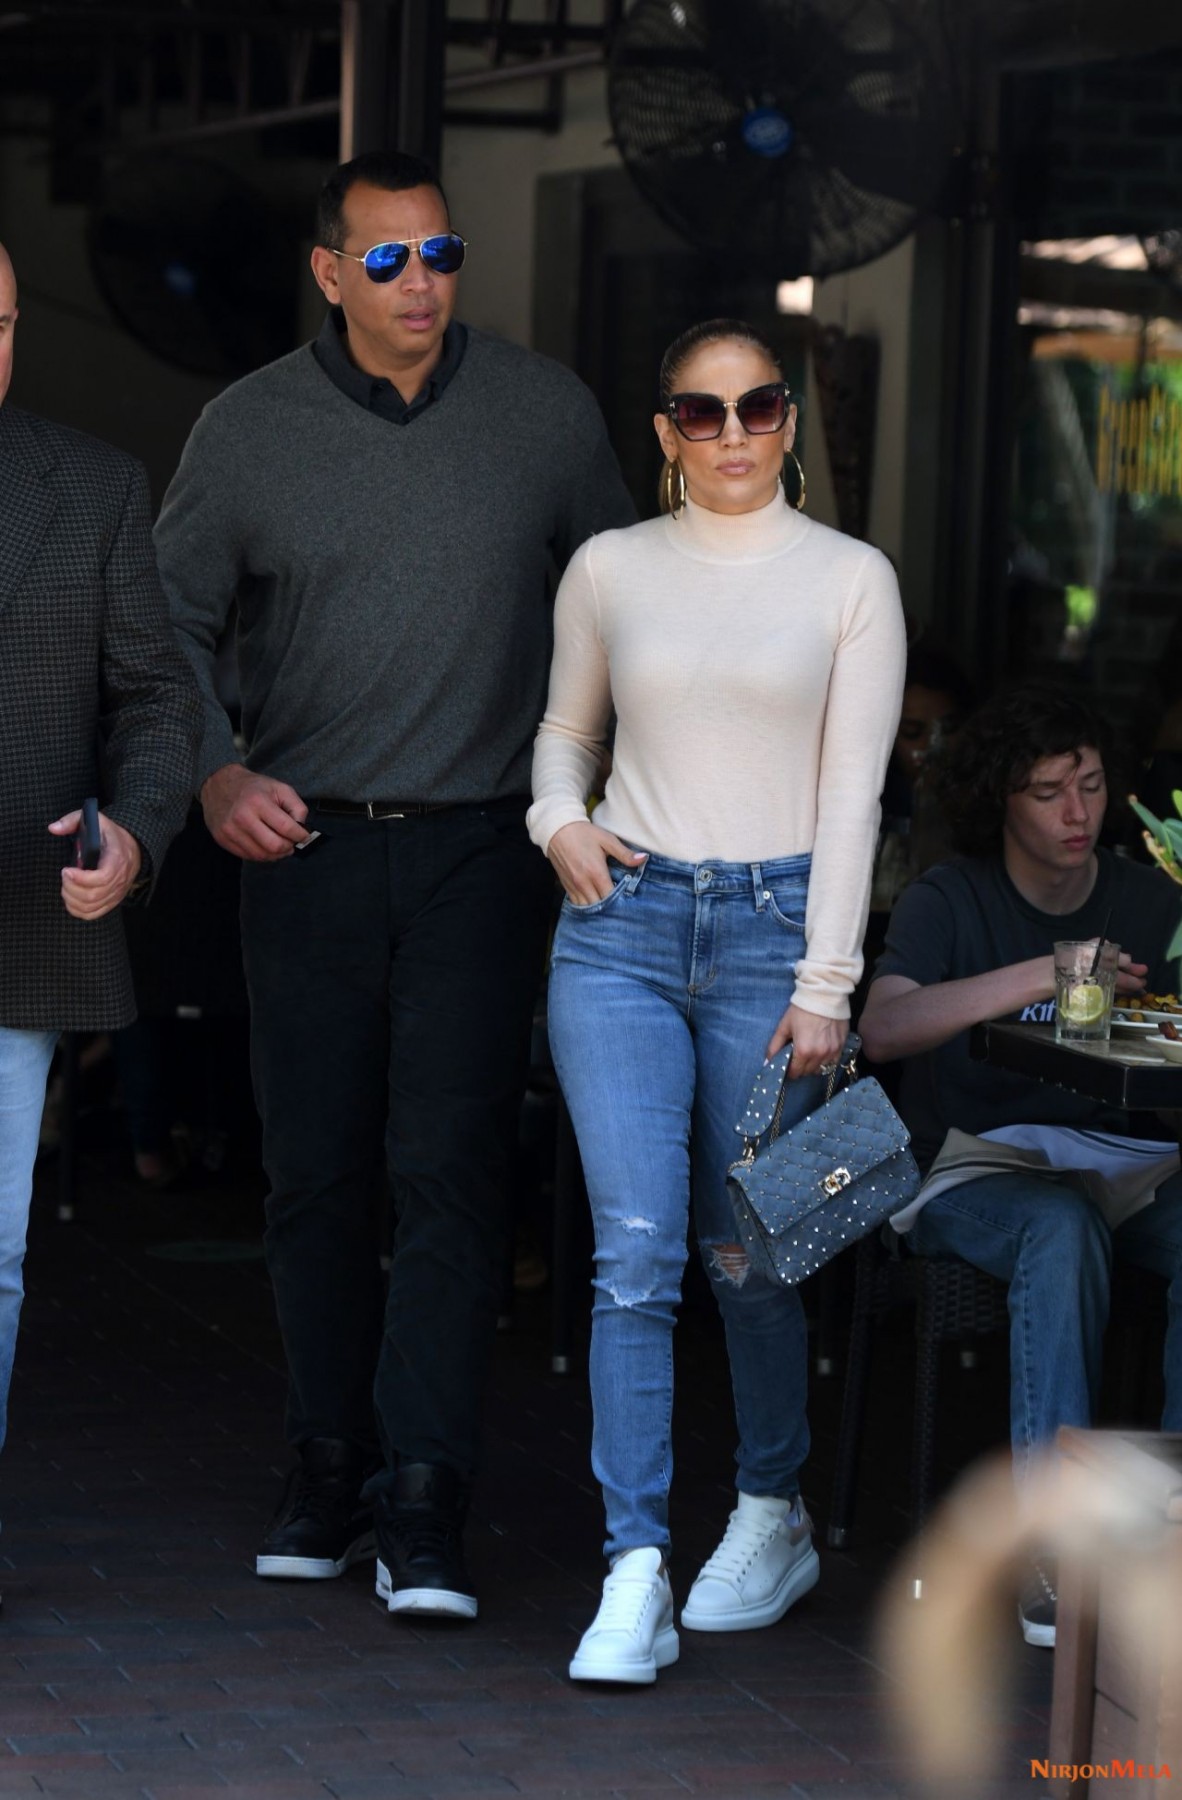 jennifer-lopez-in-tight-jeans-out-for-lunch-in-miami-05-29-2019-0.jpg